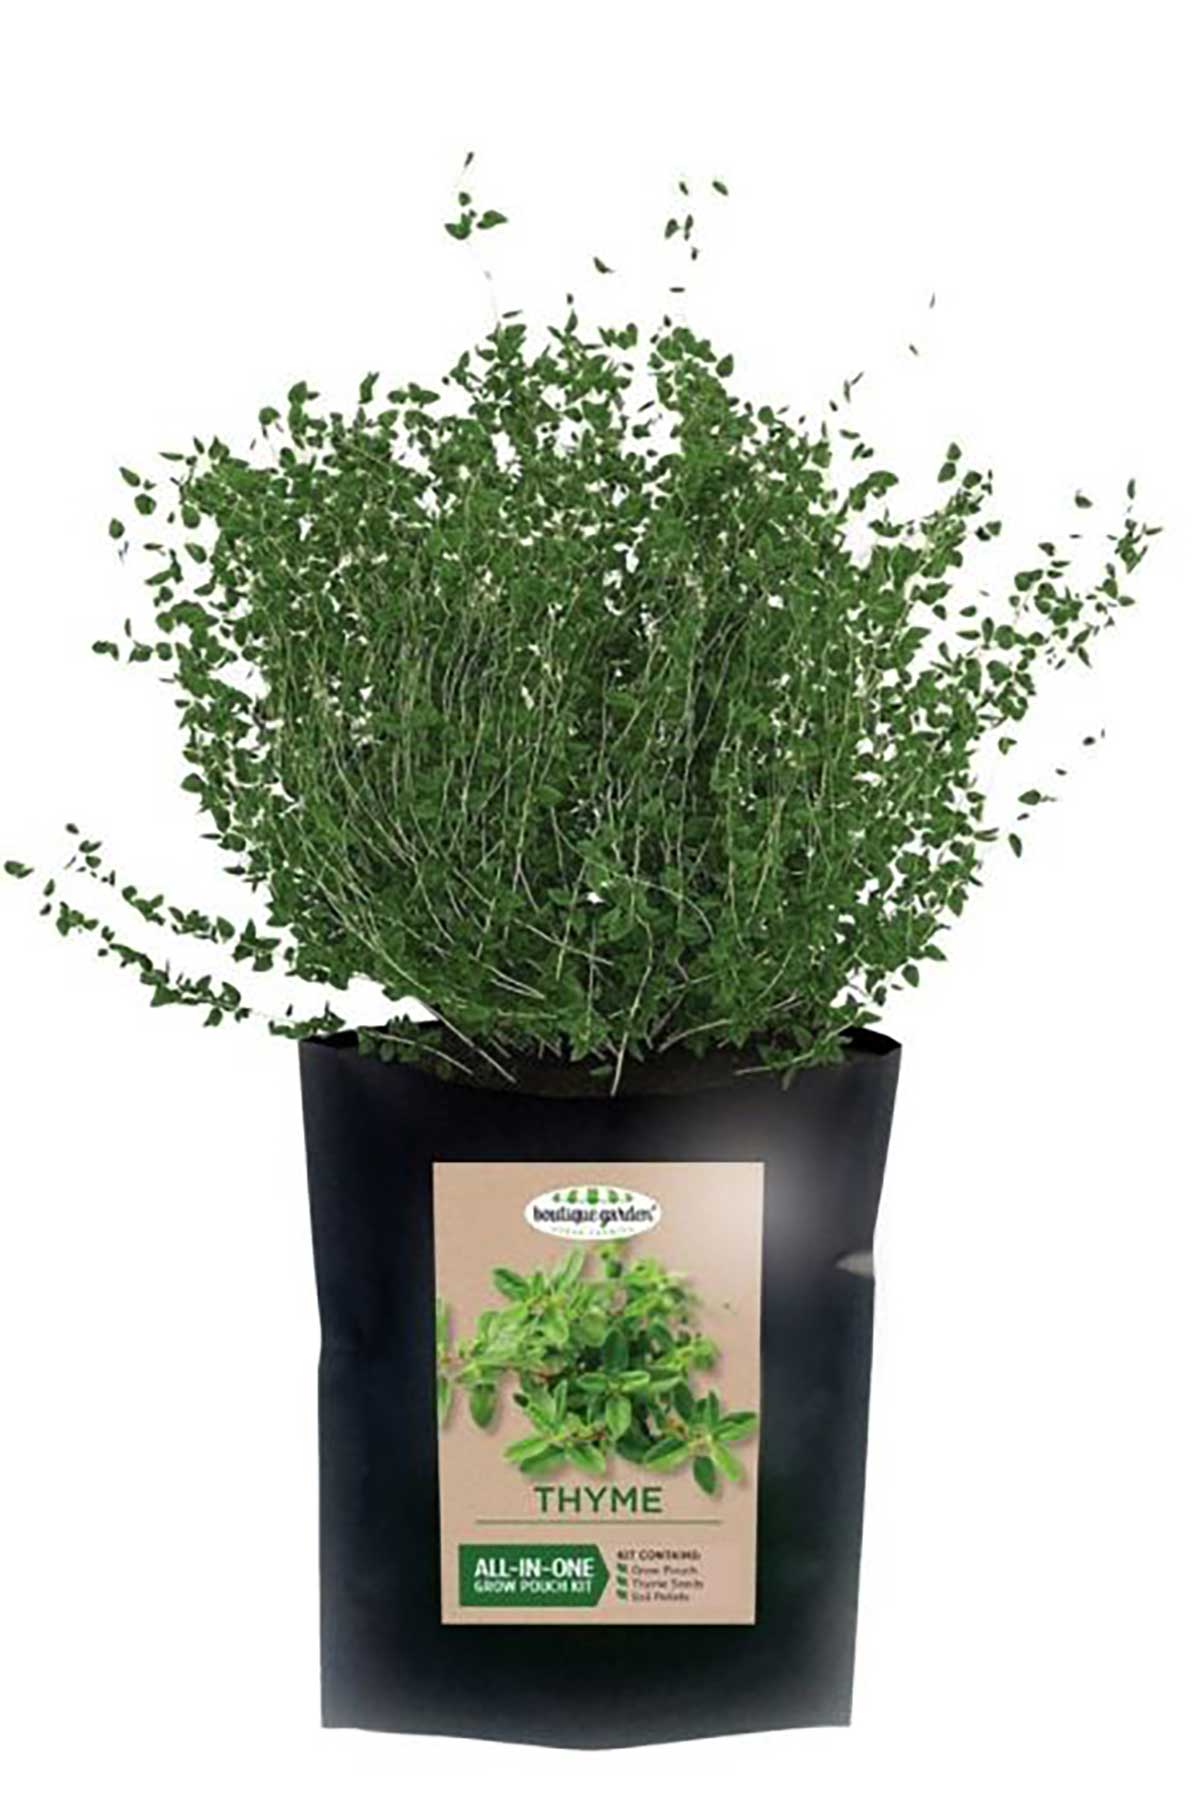 Mr Fothergills thyme all in one kit